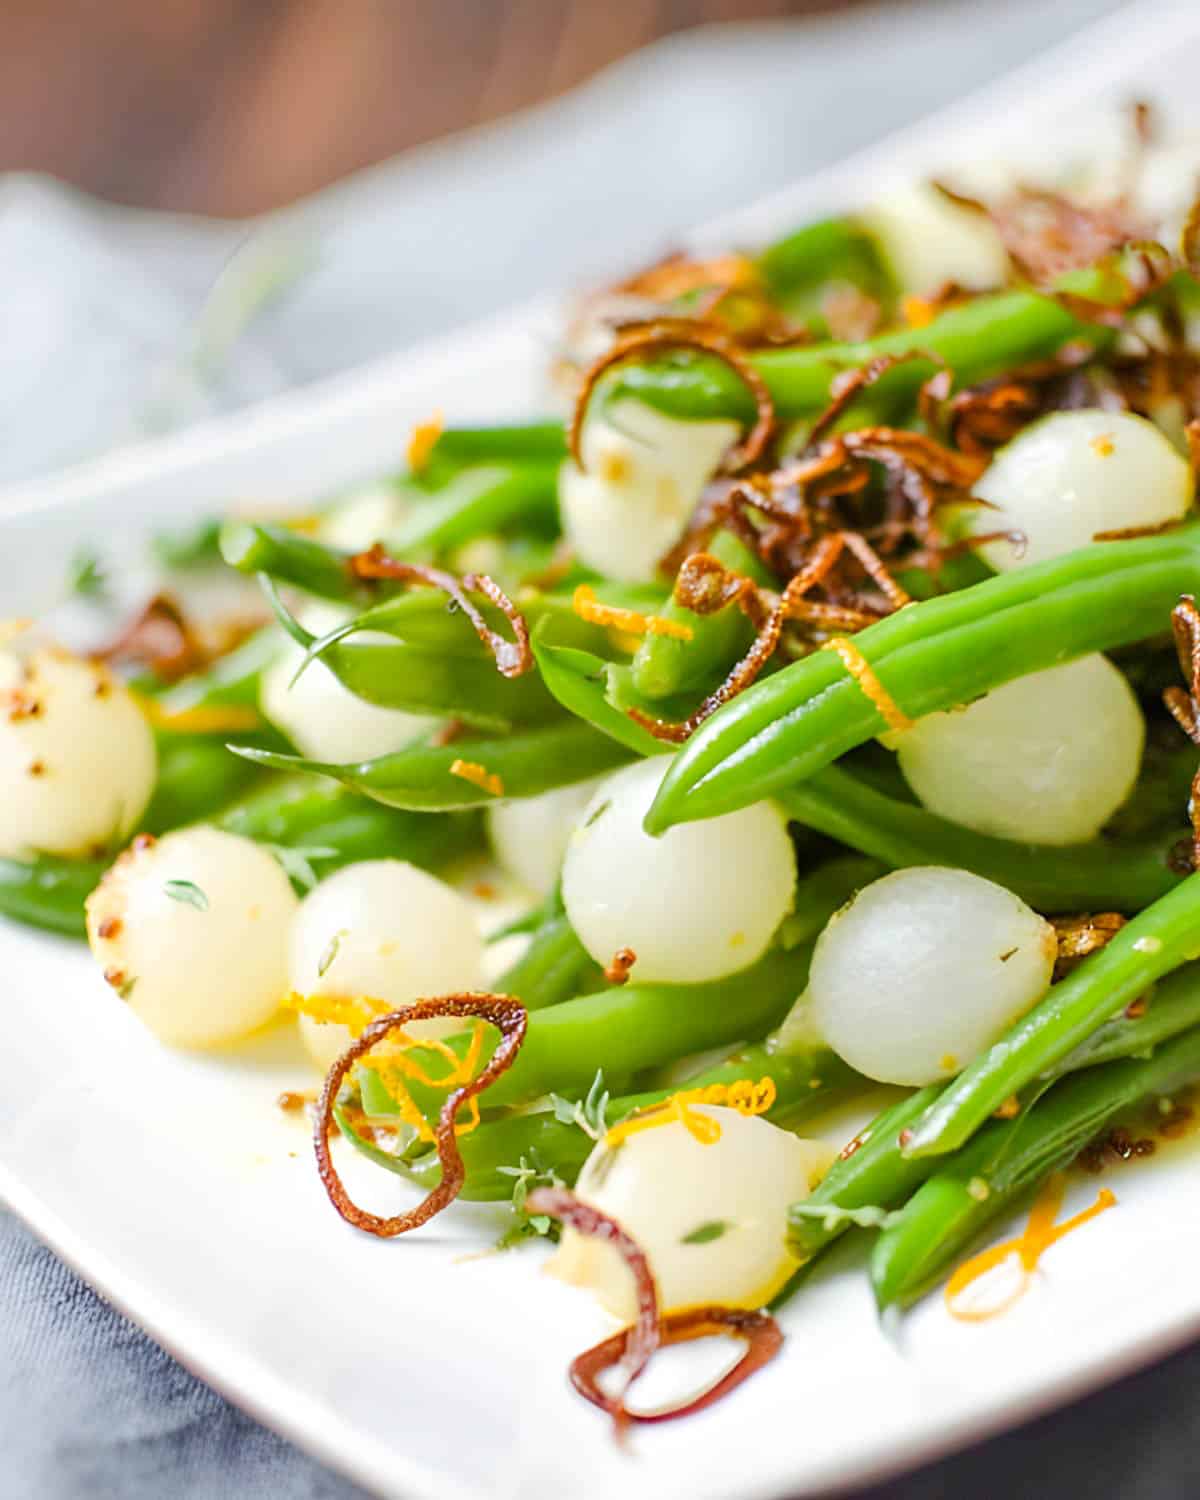 Haricots verts with pearl onions and crispy shallots.